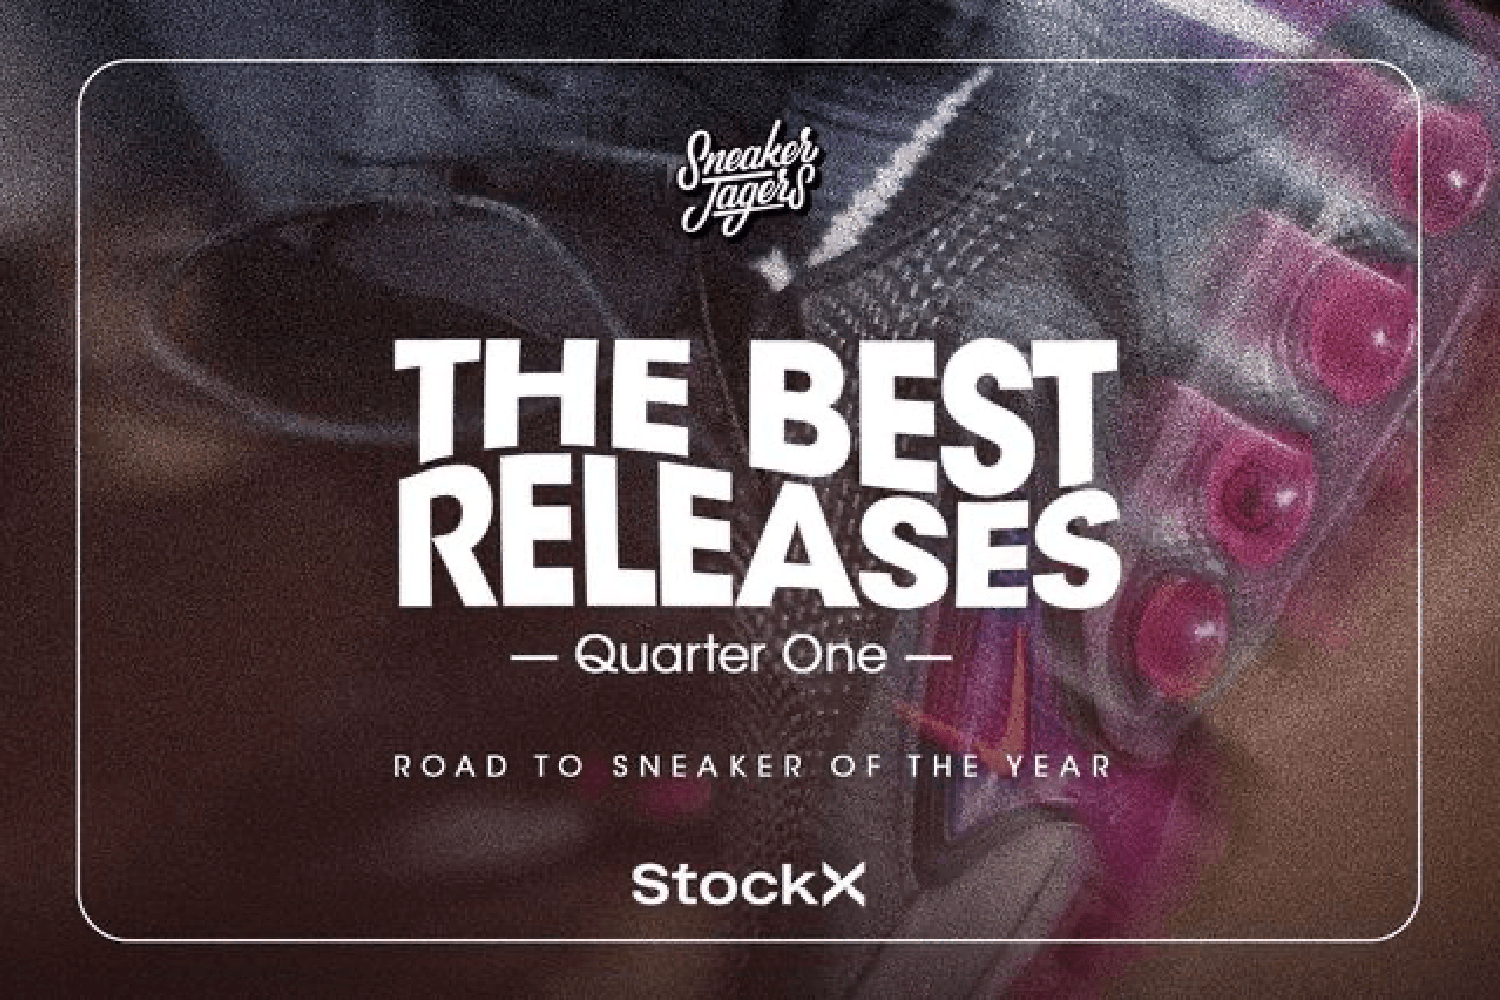 Sneakerjagers presents: Road to Sneaker of the Year giveaway - Top 3 releases